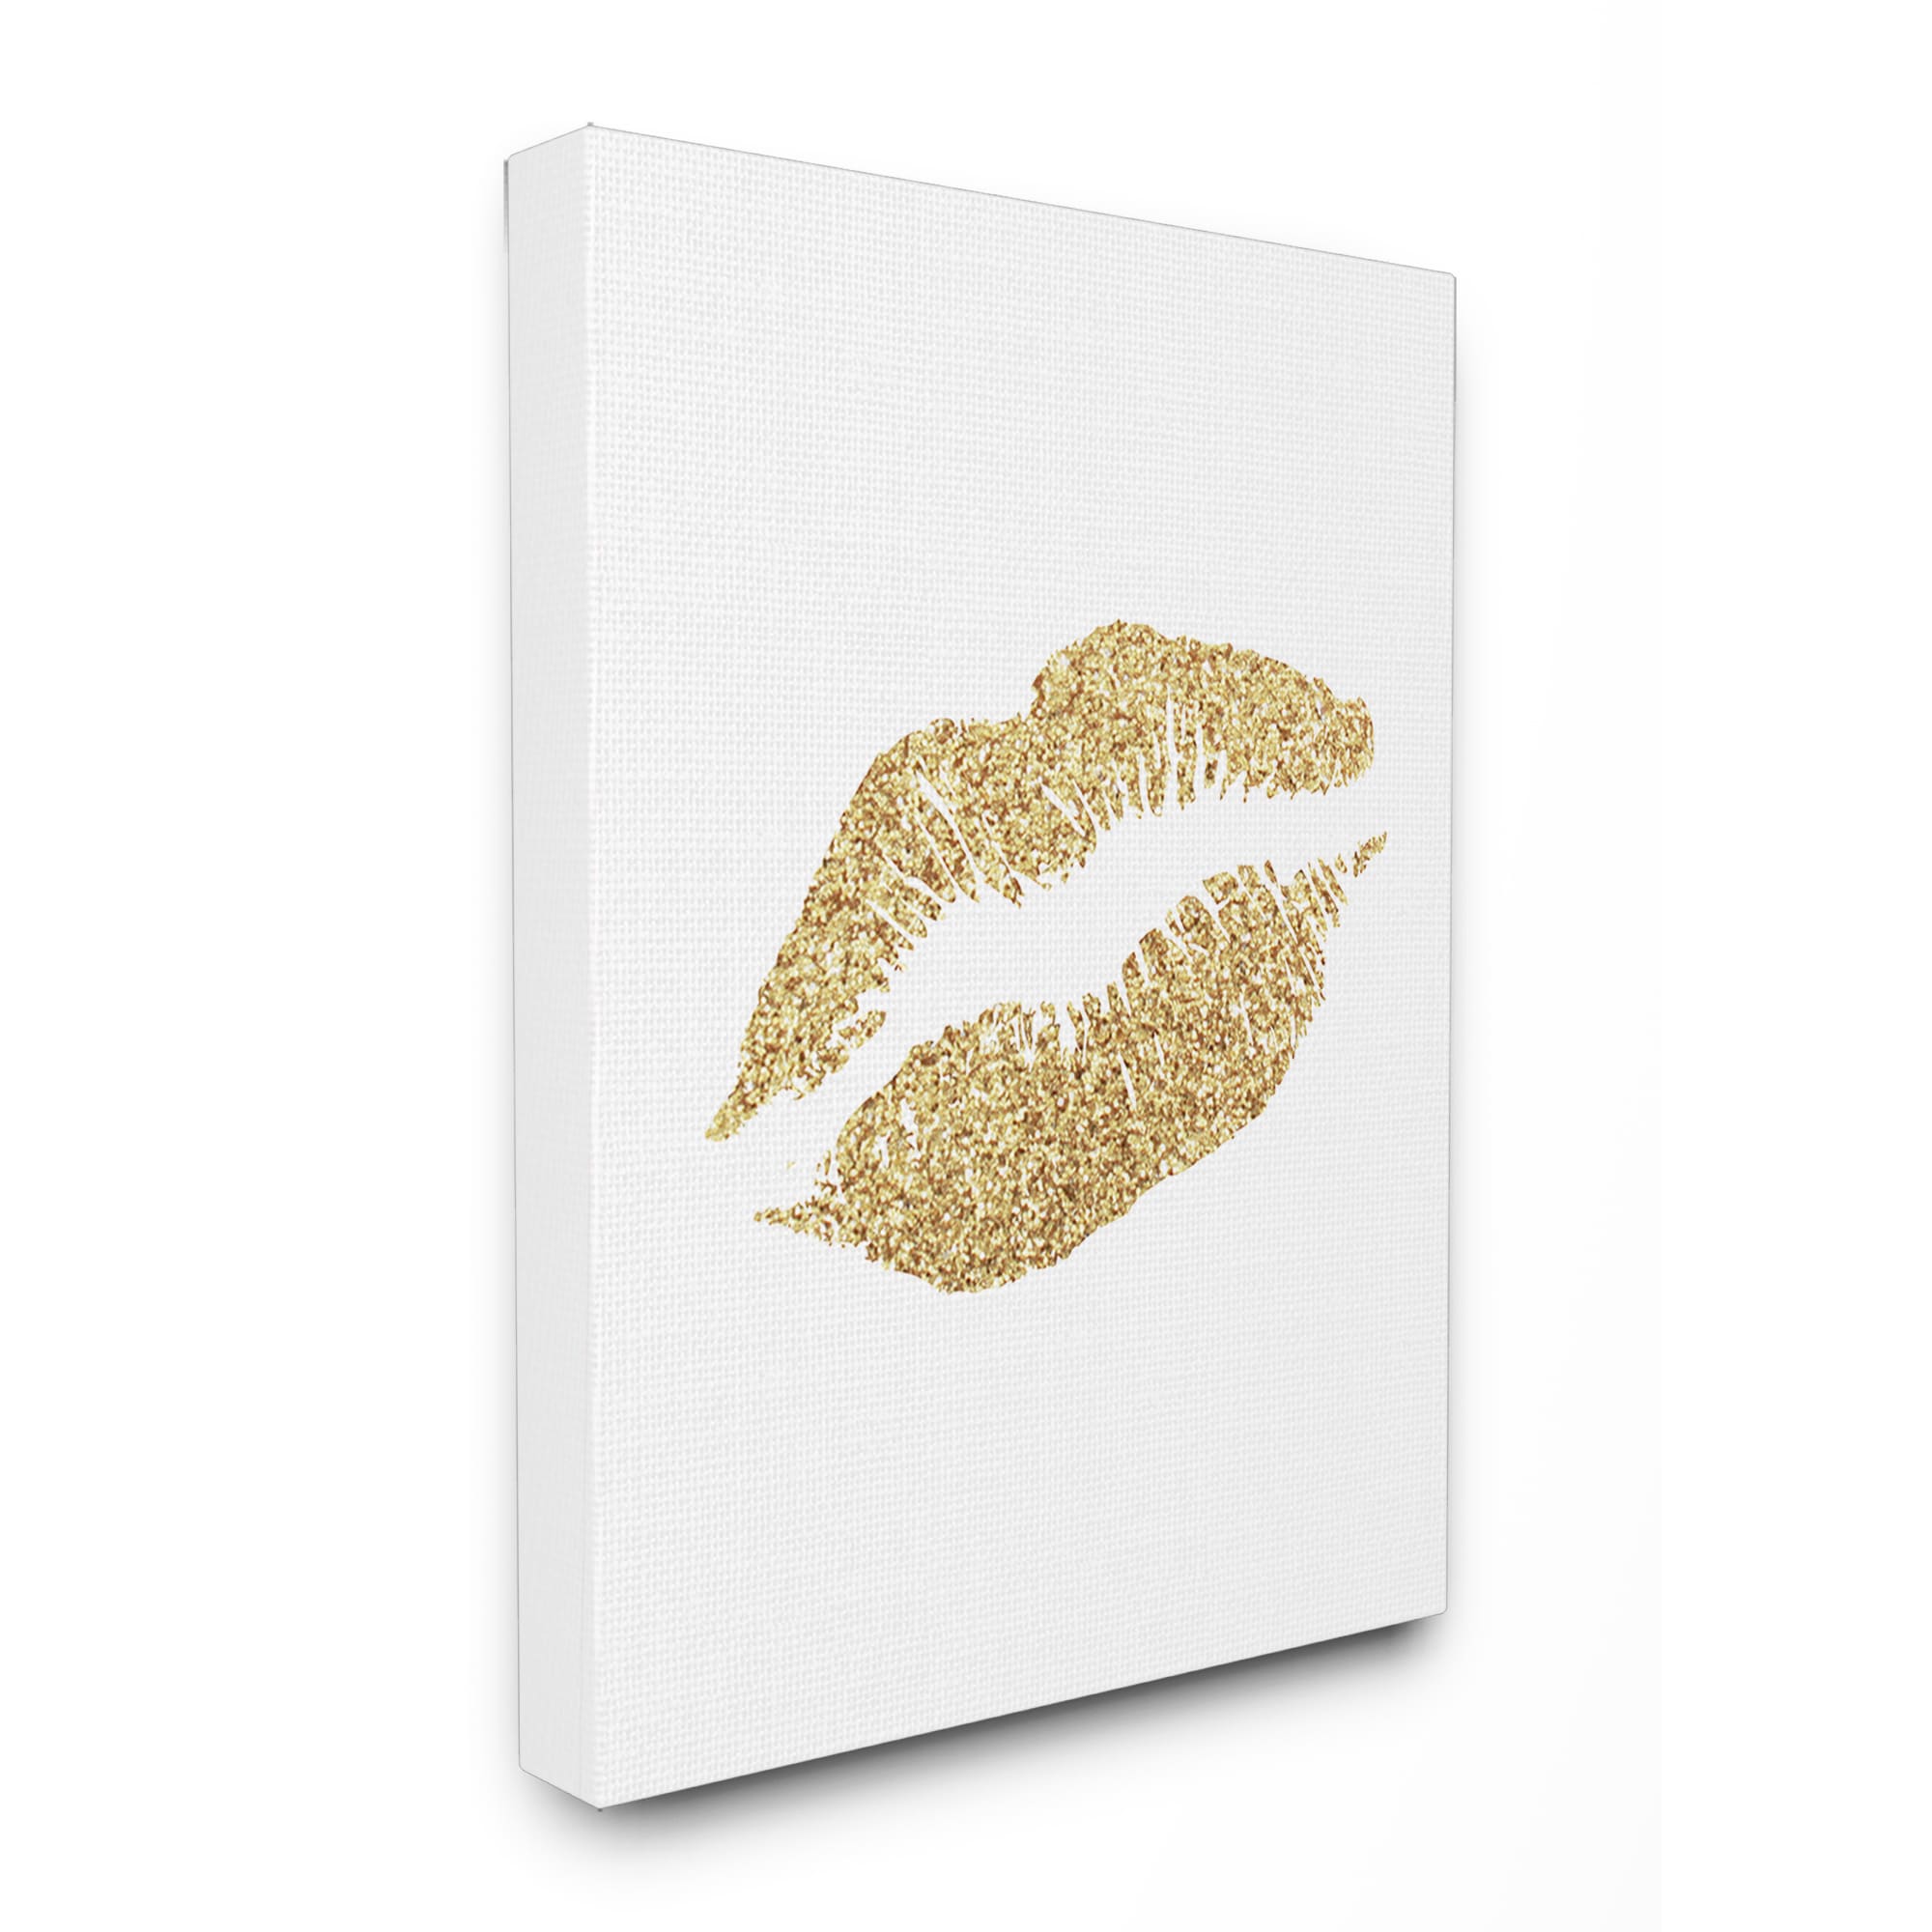 Shop Glitter Lips Glam White Gold Wooden Stretched Canvas Wall Art Overstock 11867335 16 X 20